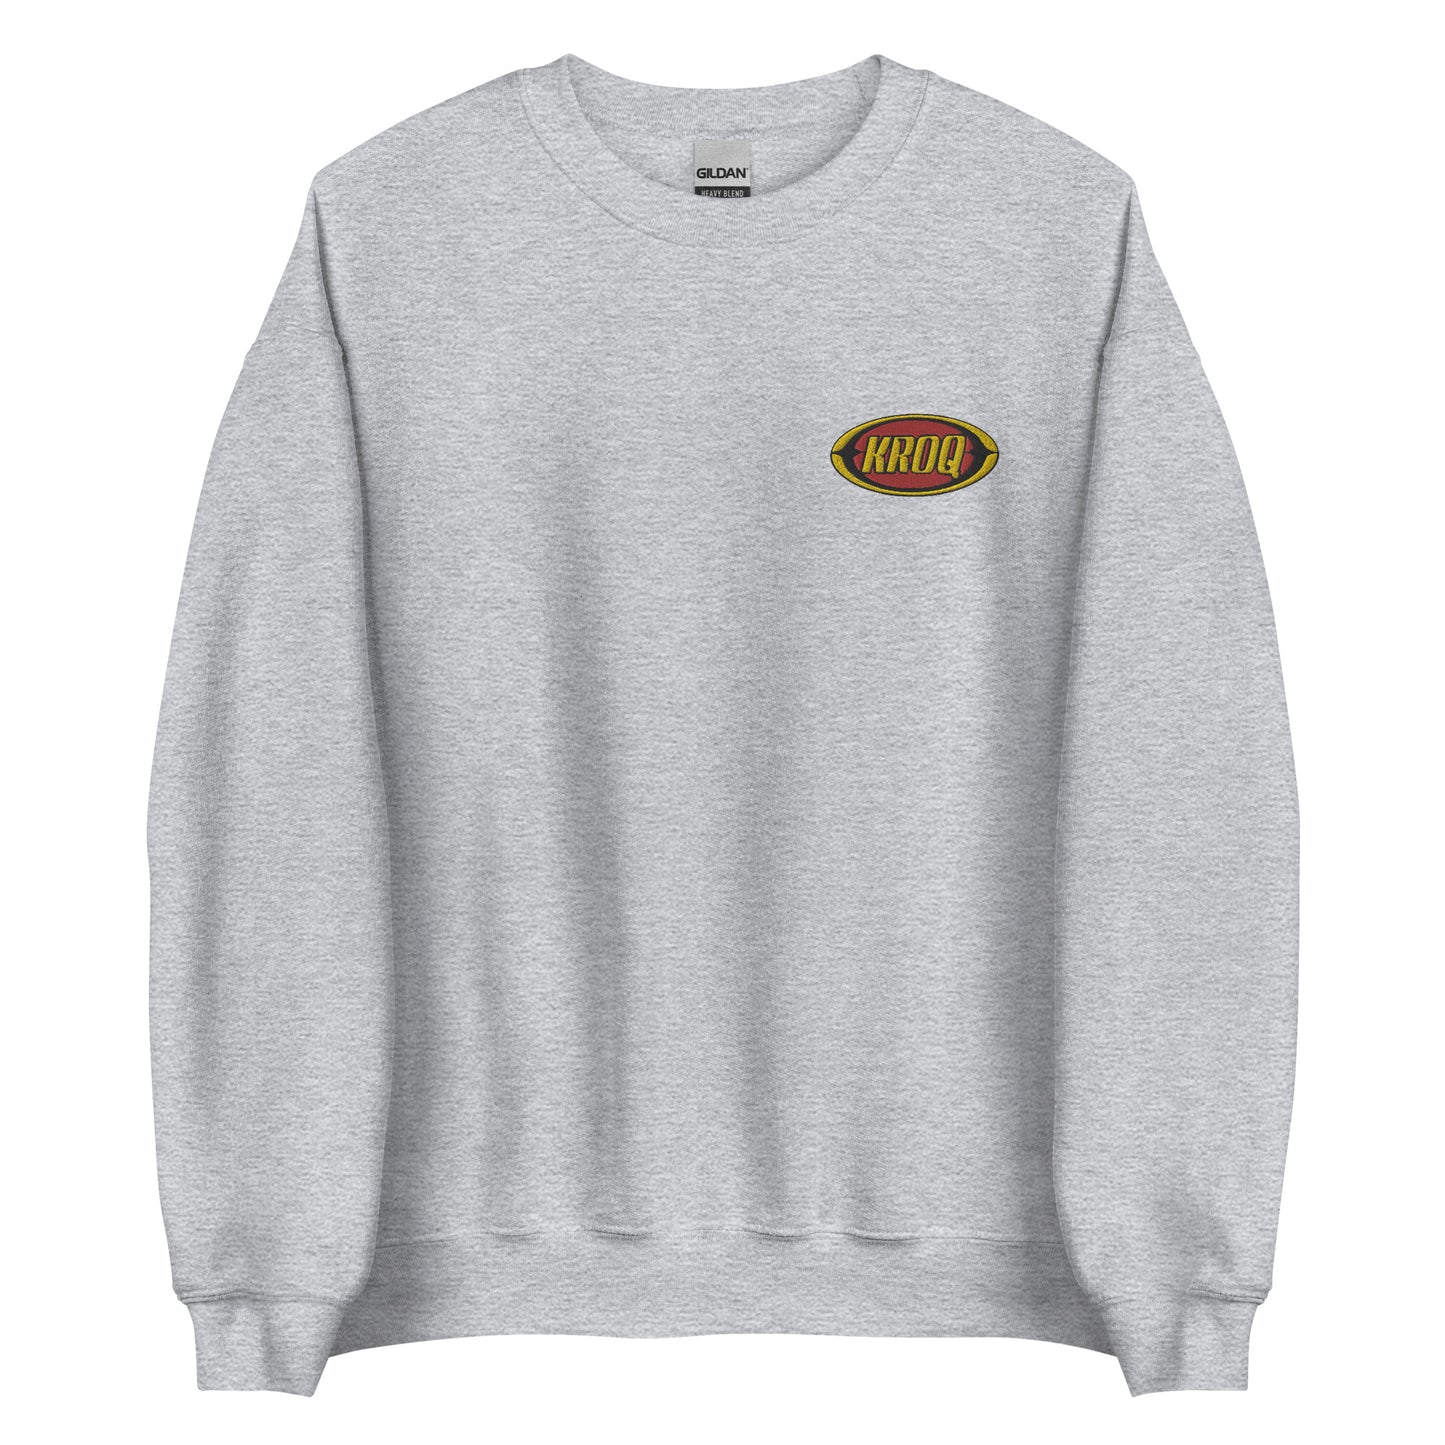 90s Embroidered Sweater - Grey